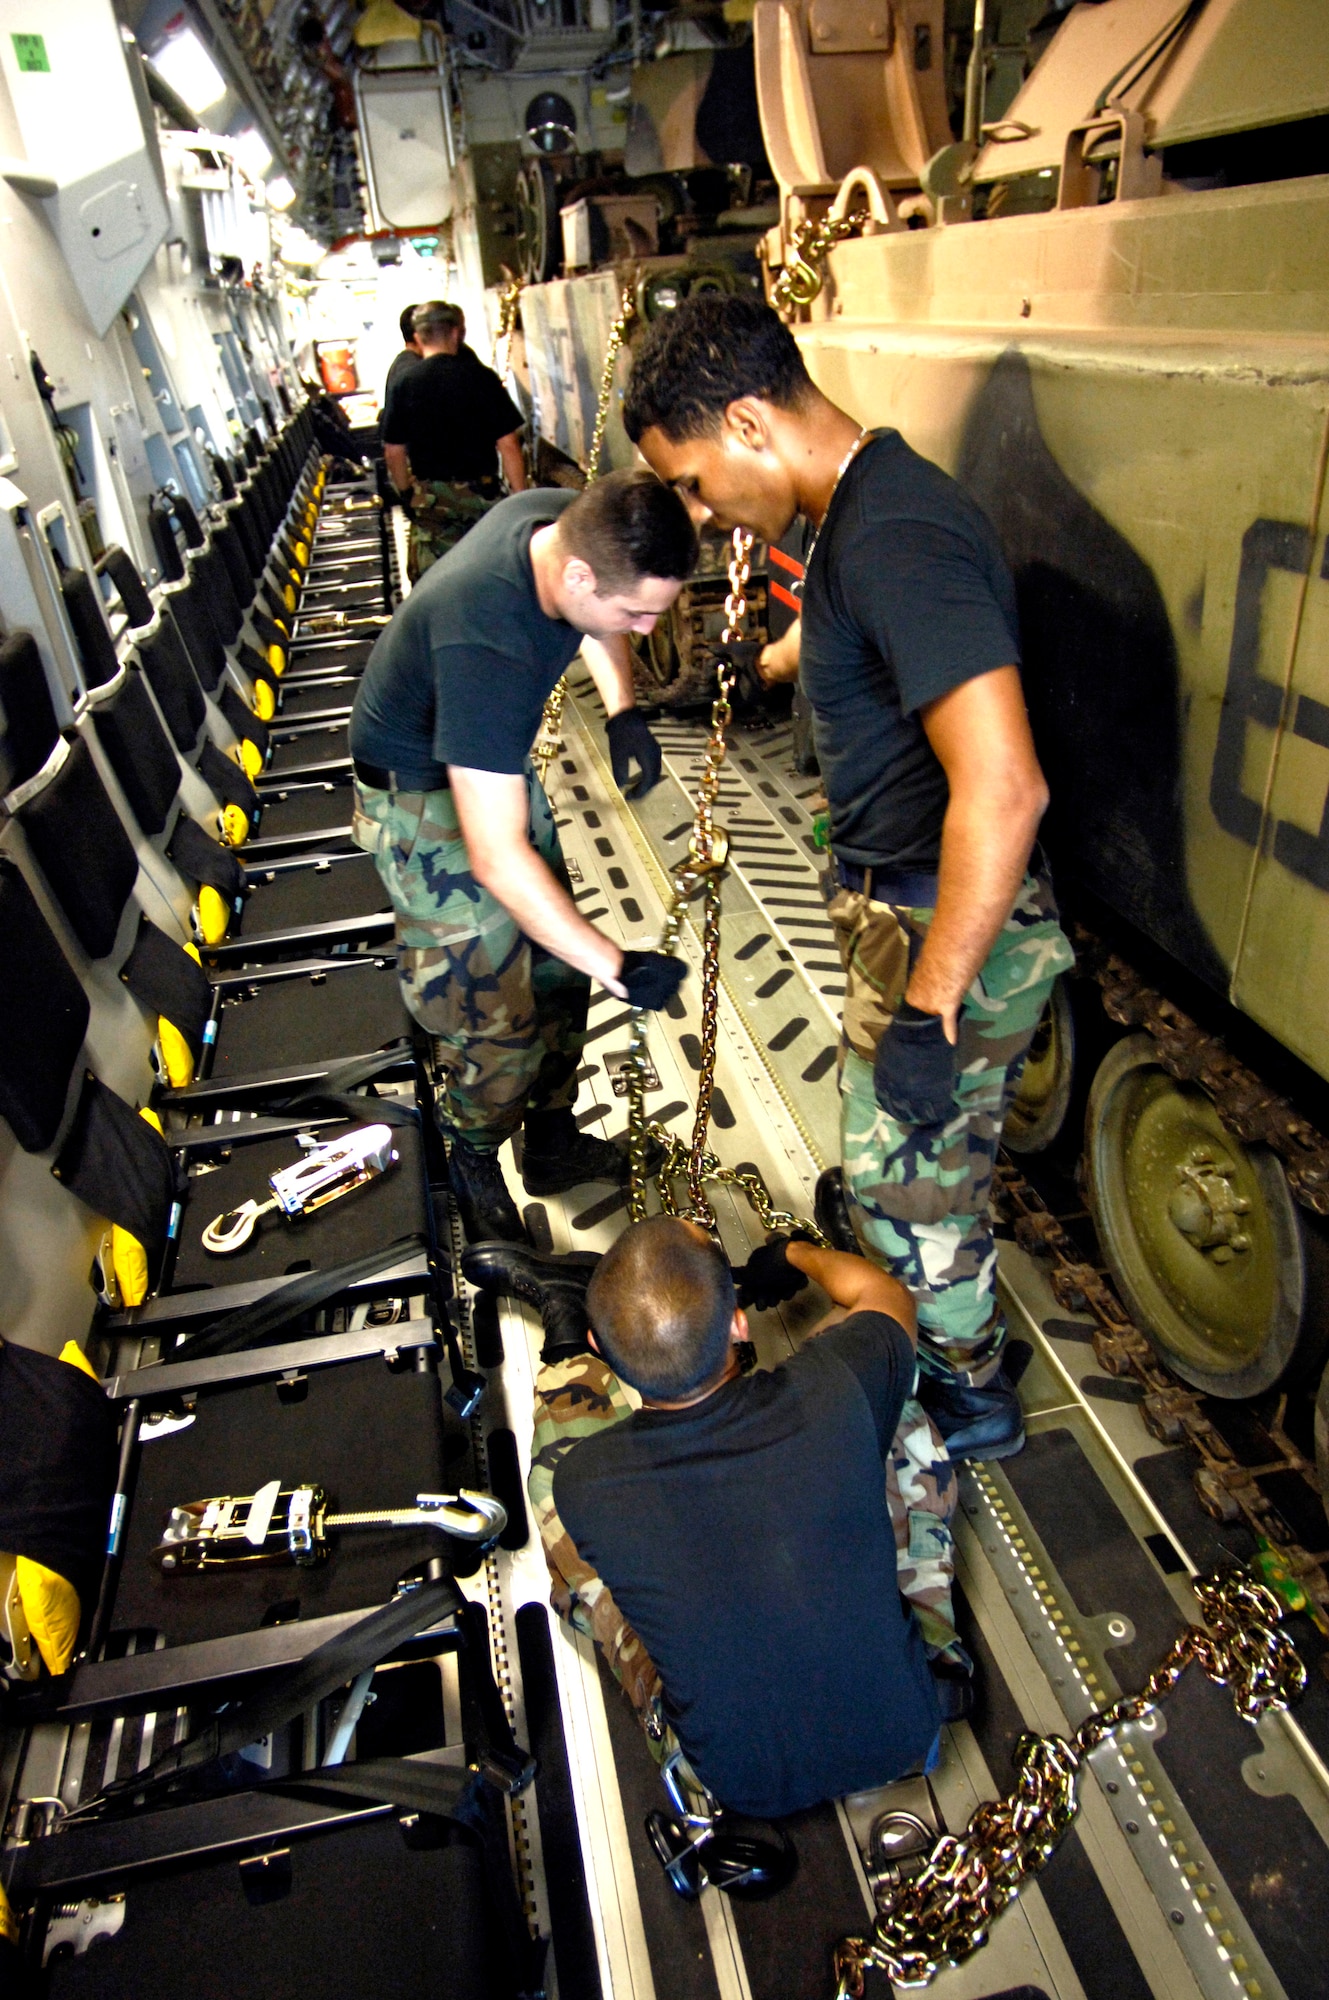 Airmen from the Combat Mobility Element, or CME, secure an armored personnel carrier on a C-17 Globemaster III at Royal Australian Air Force Base Townsville, Australia, on Tuesday, May 30, 2006  The CME is part of the 15th Logistical Readiness Squadron at Hickam Air Force Base, Hawaii. The CME is in Townsville to help prepare and load equipment on C-17s from Hickam that are repositioning Australian Defense Forces to better support peace operations in East Timor. (U.S. Air Force photo/Tech. Sgt. Shane A. Cuomo)